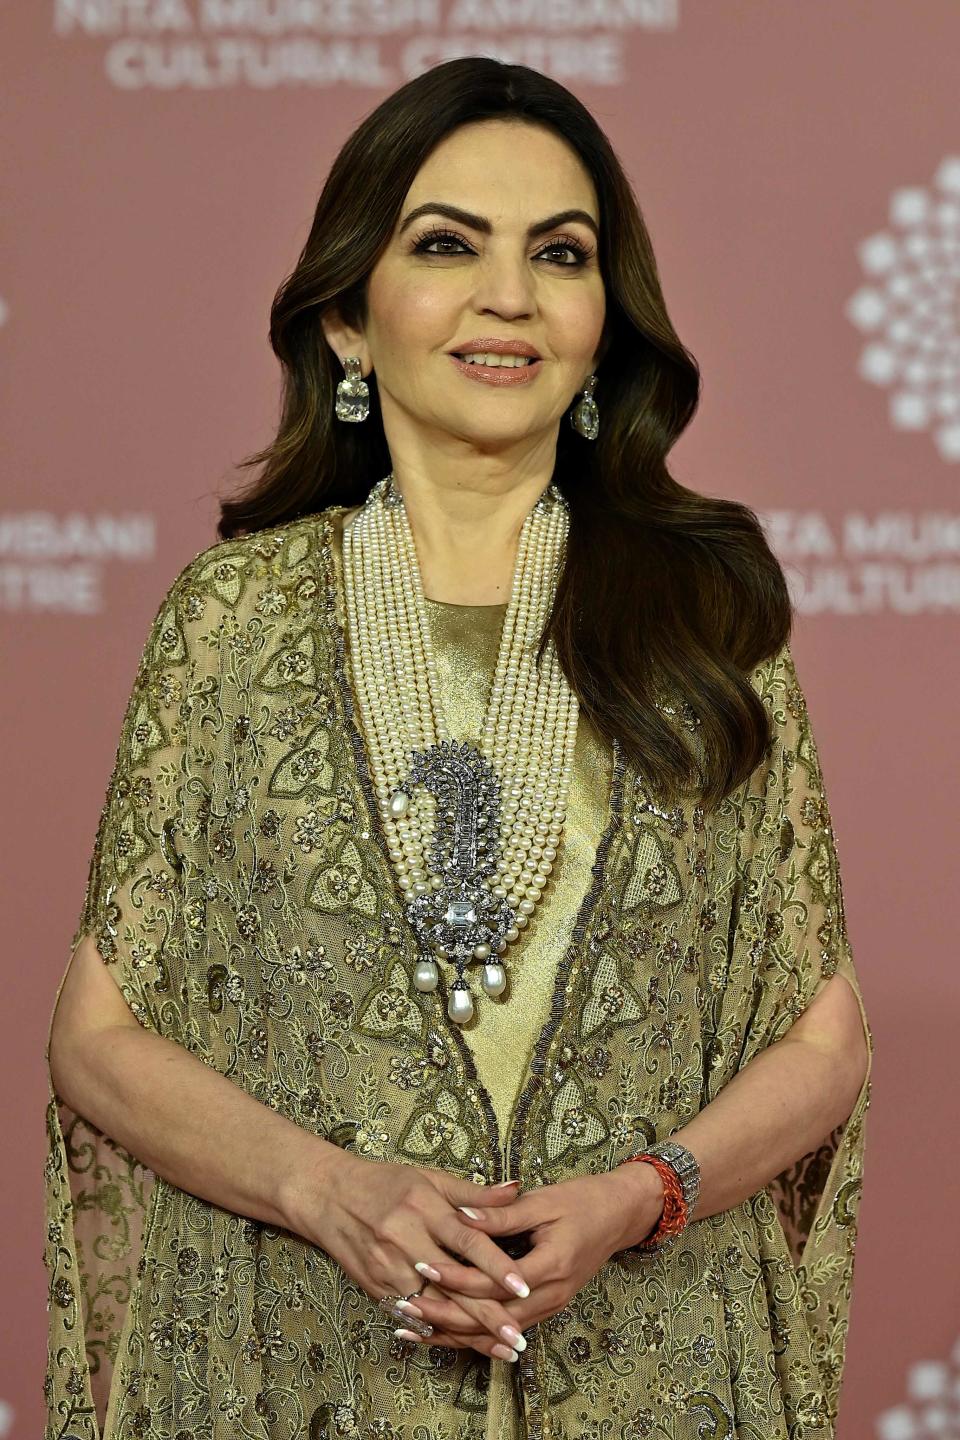 Nita Mukesh Ambani, founder and chairperson of Reliance Foundation, is a vision in gold, wearing a metallic-esque wrap.